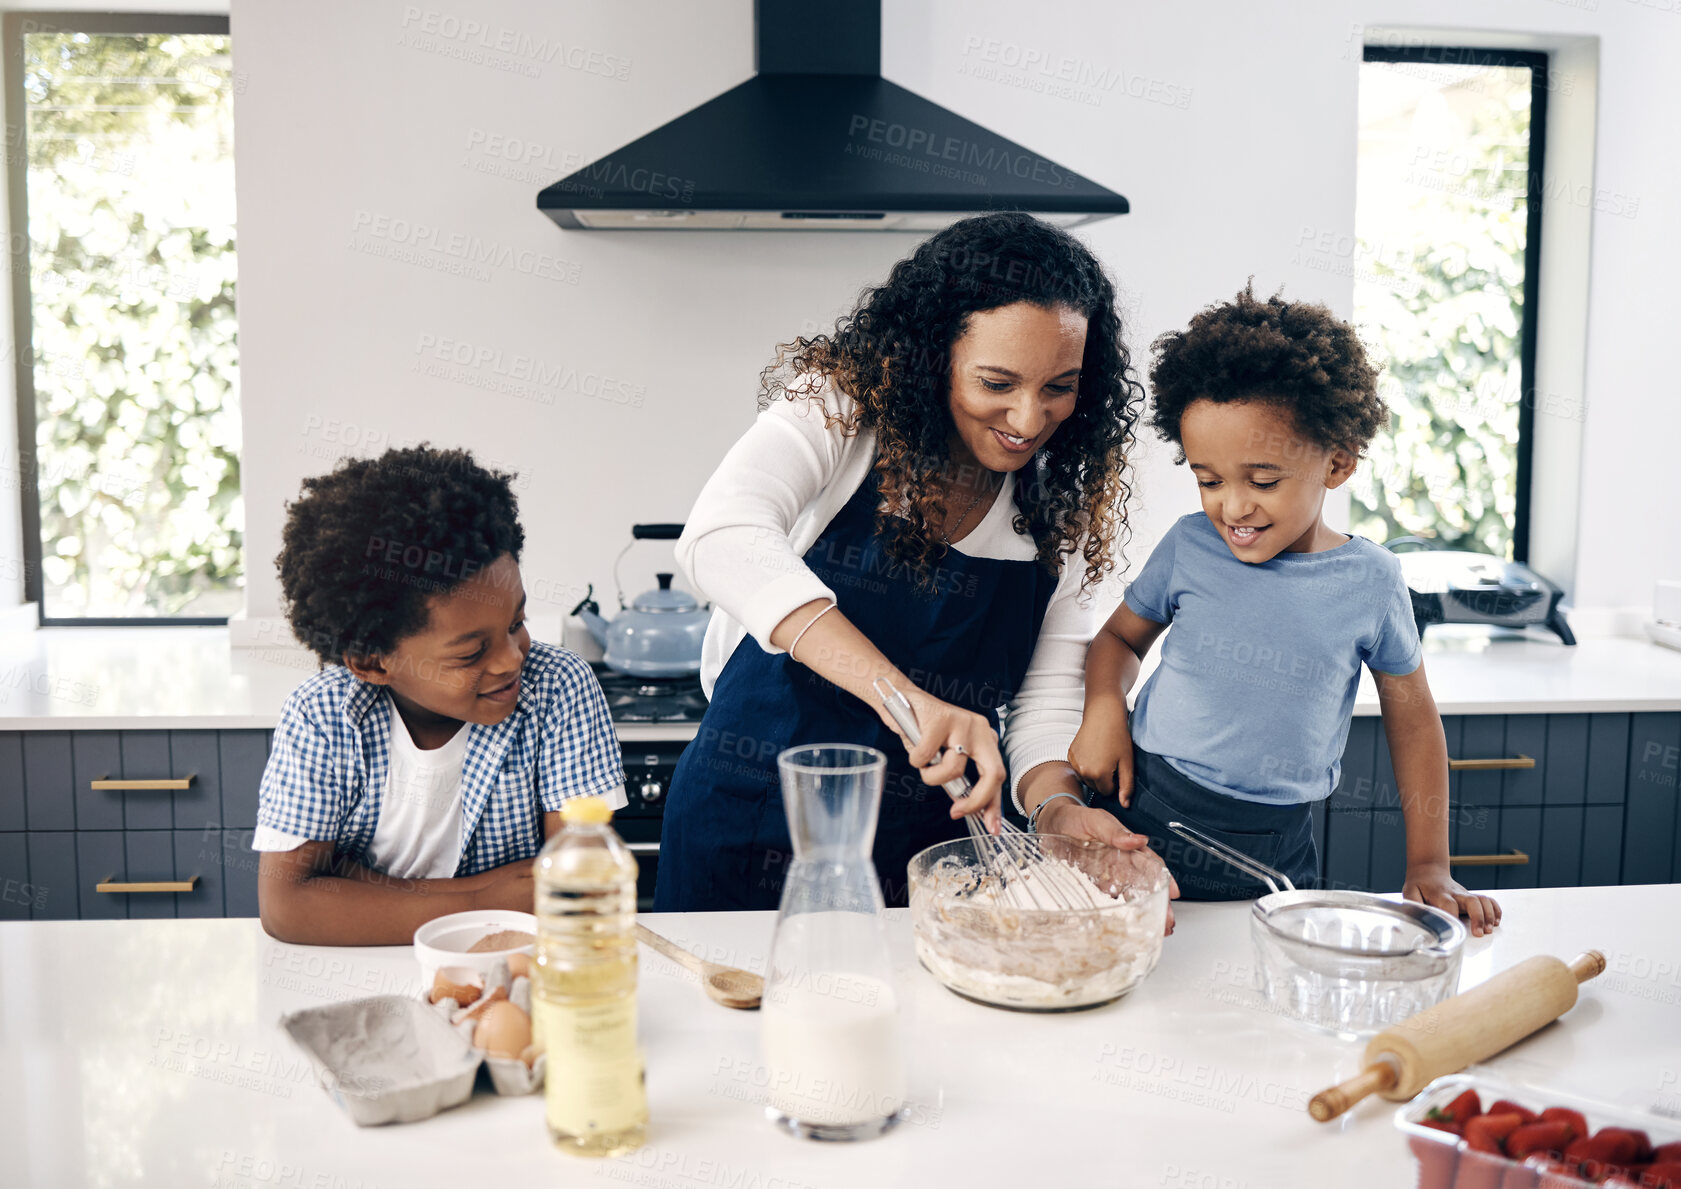 Buy stock photo Adorable little boy with afro baking in the kitchen at home with his mom and brother. Cheerful mixed race woman mixing ingredients with the help of her little boys. Baking is a bonding activity